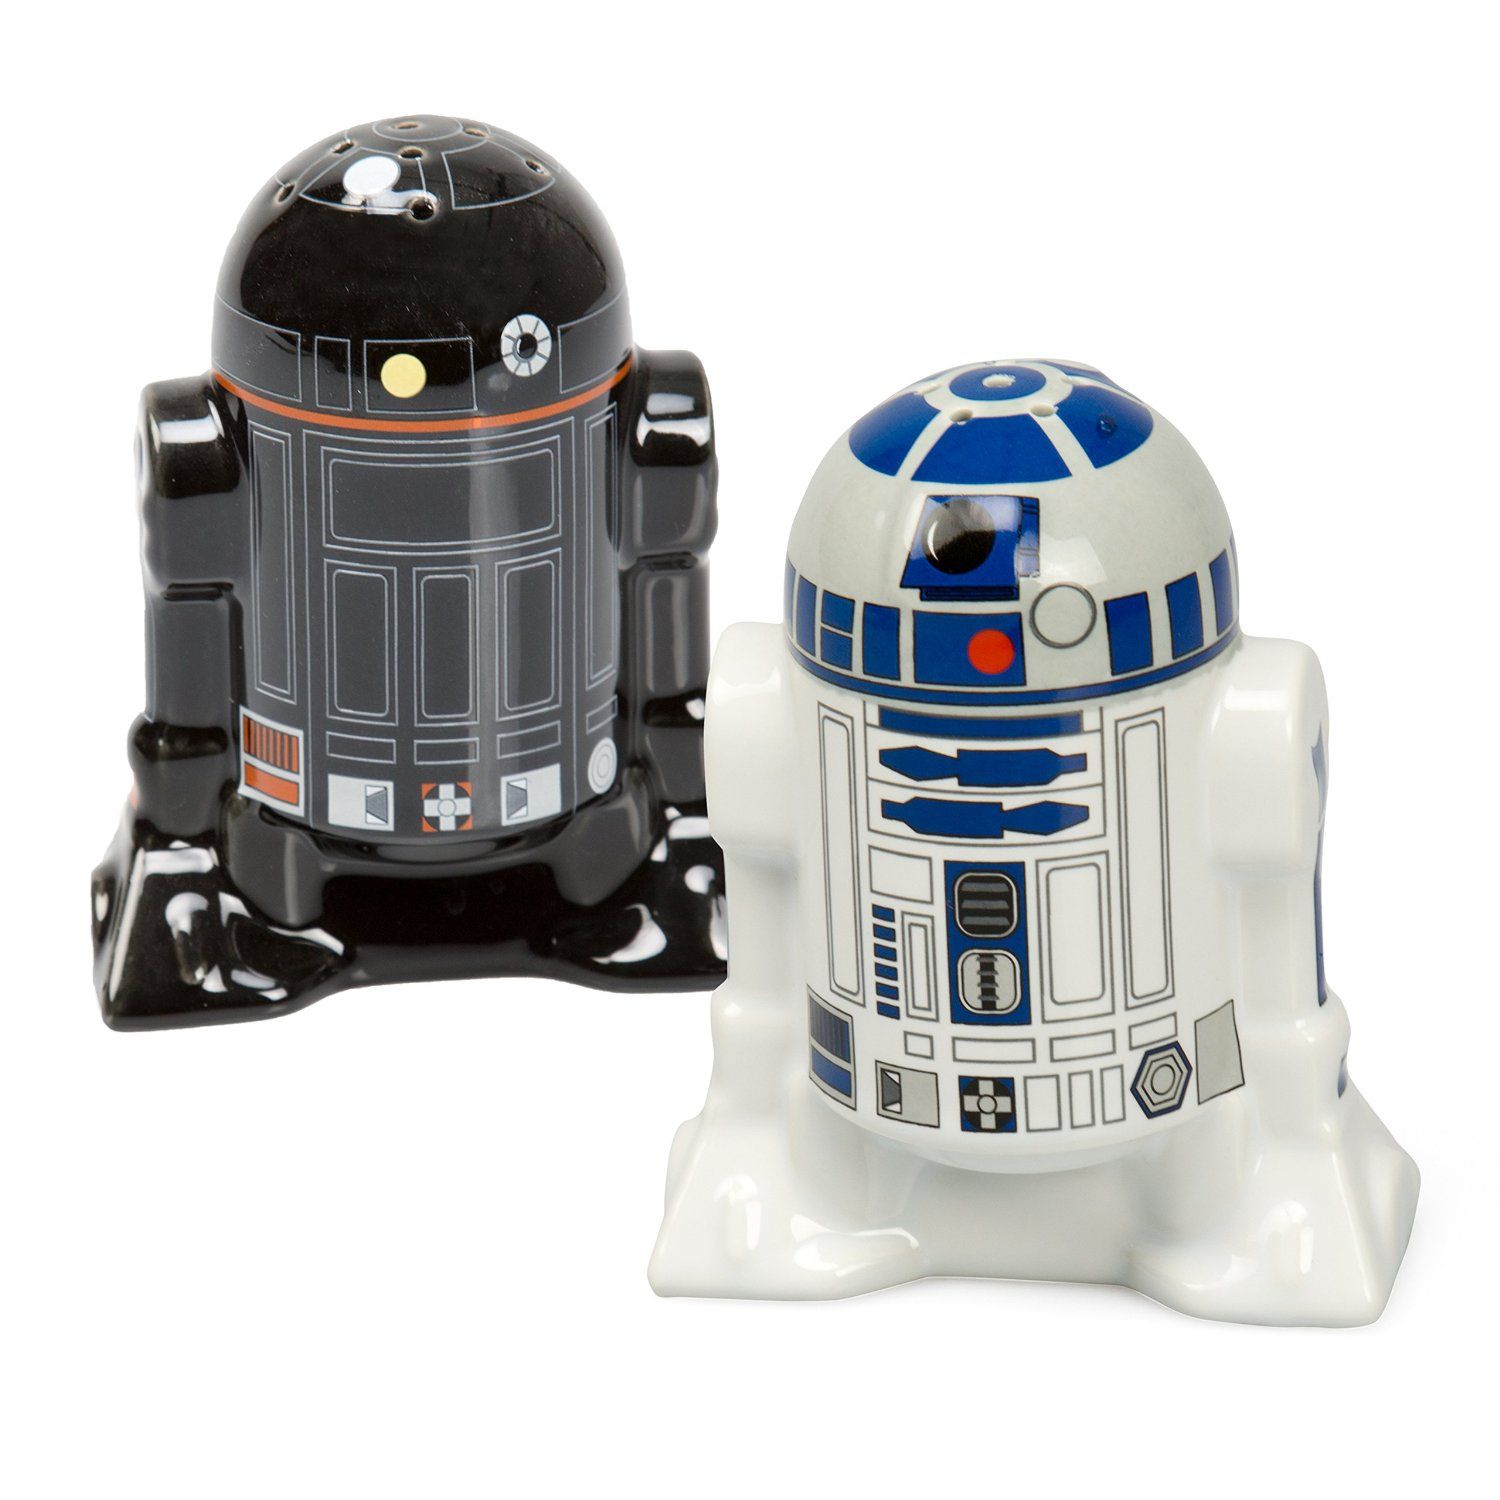 Star Wars Salt and Pepper Shakers - R2D2 and R2Q5 - Add a little Star Wars to every Meal - Star Wars Salt and Pepper Shakers - R2D2 and R2Q5 - Add a little Star Wars to every Meal -   Star Wars Household Items